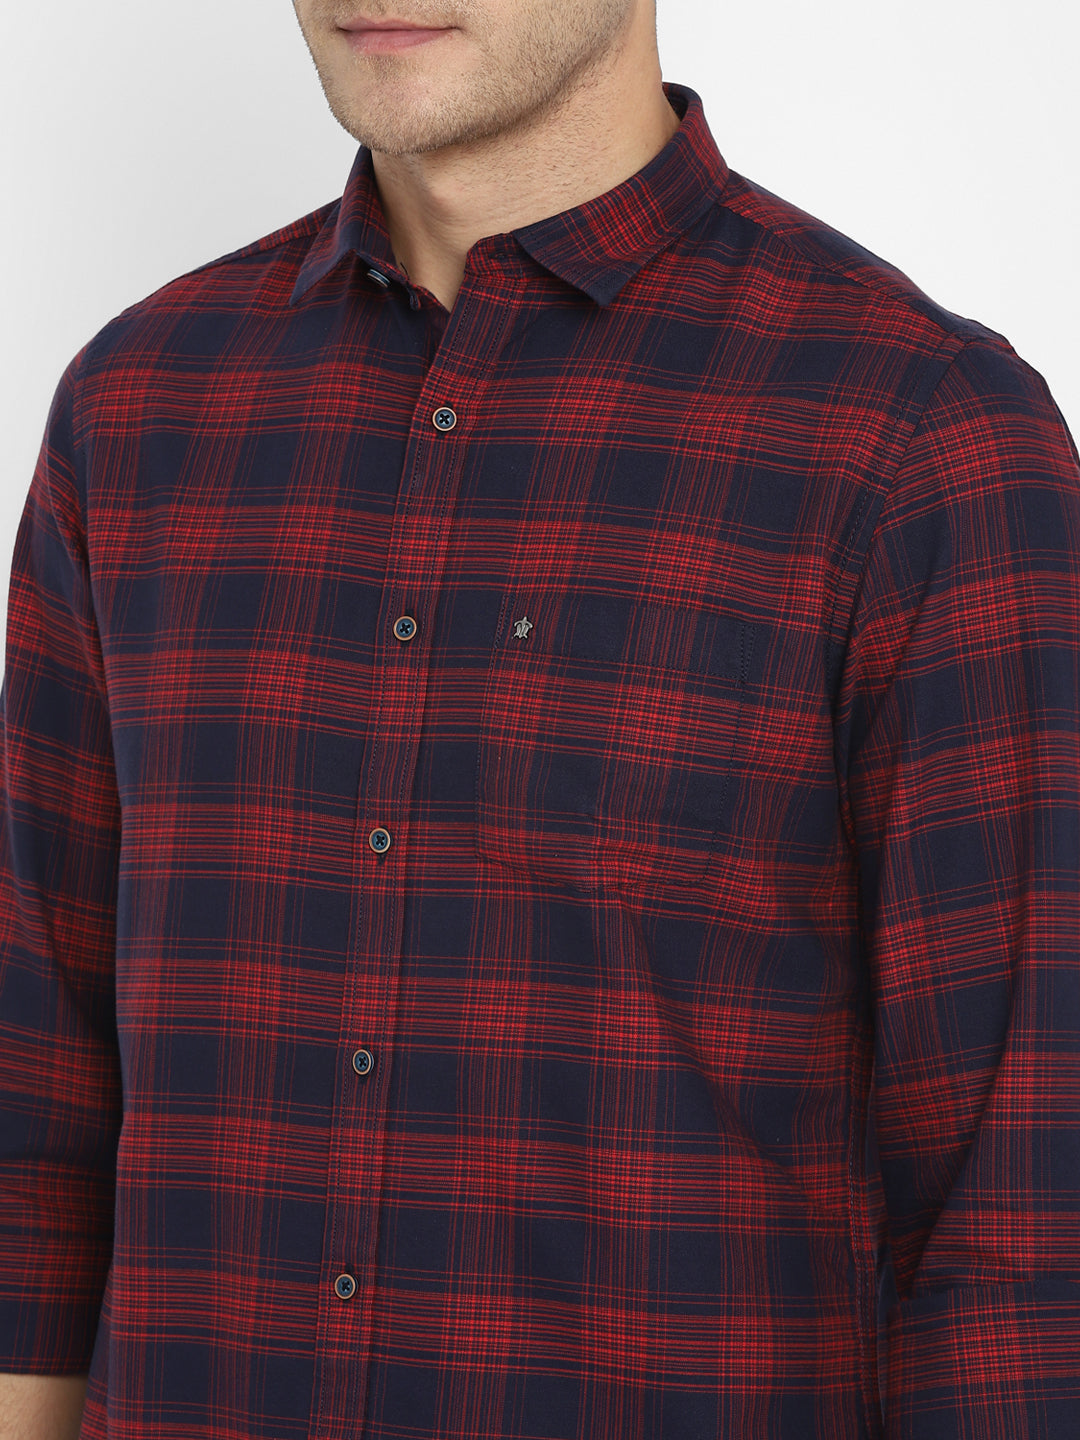 Turtle Men Red Cotton Checked Slim Fit Shirts